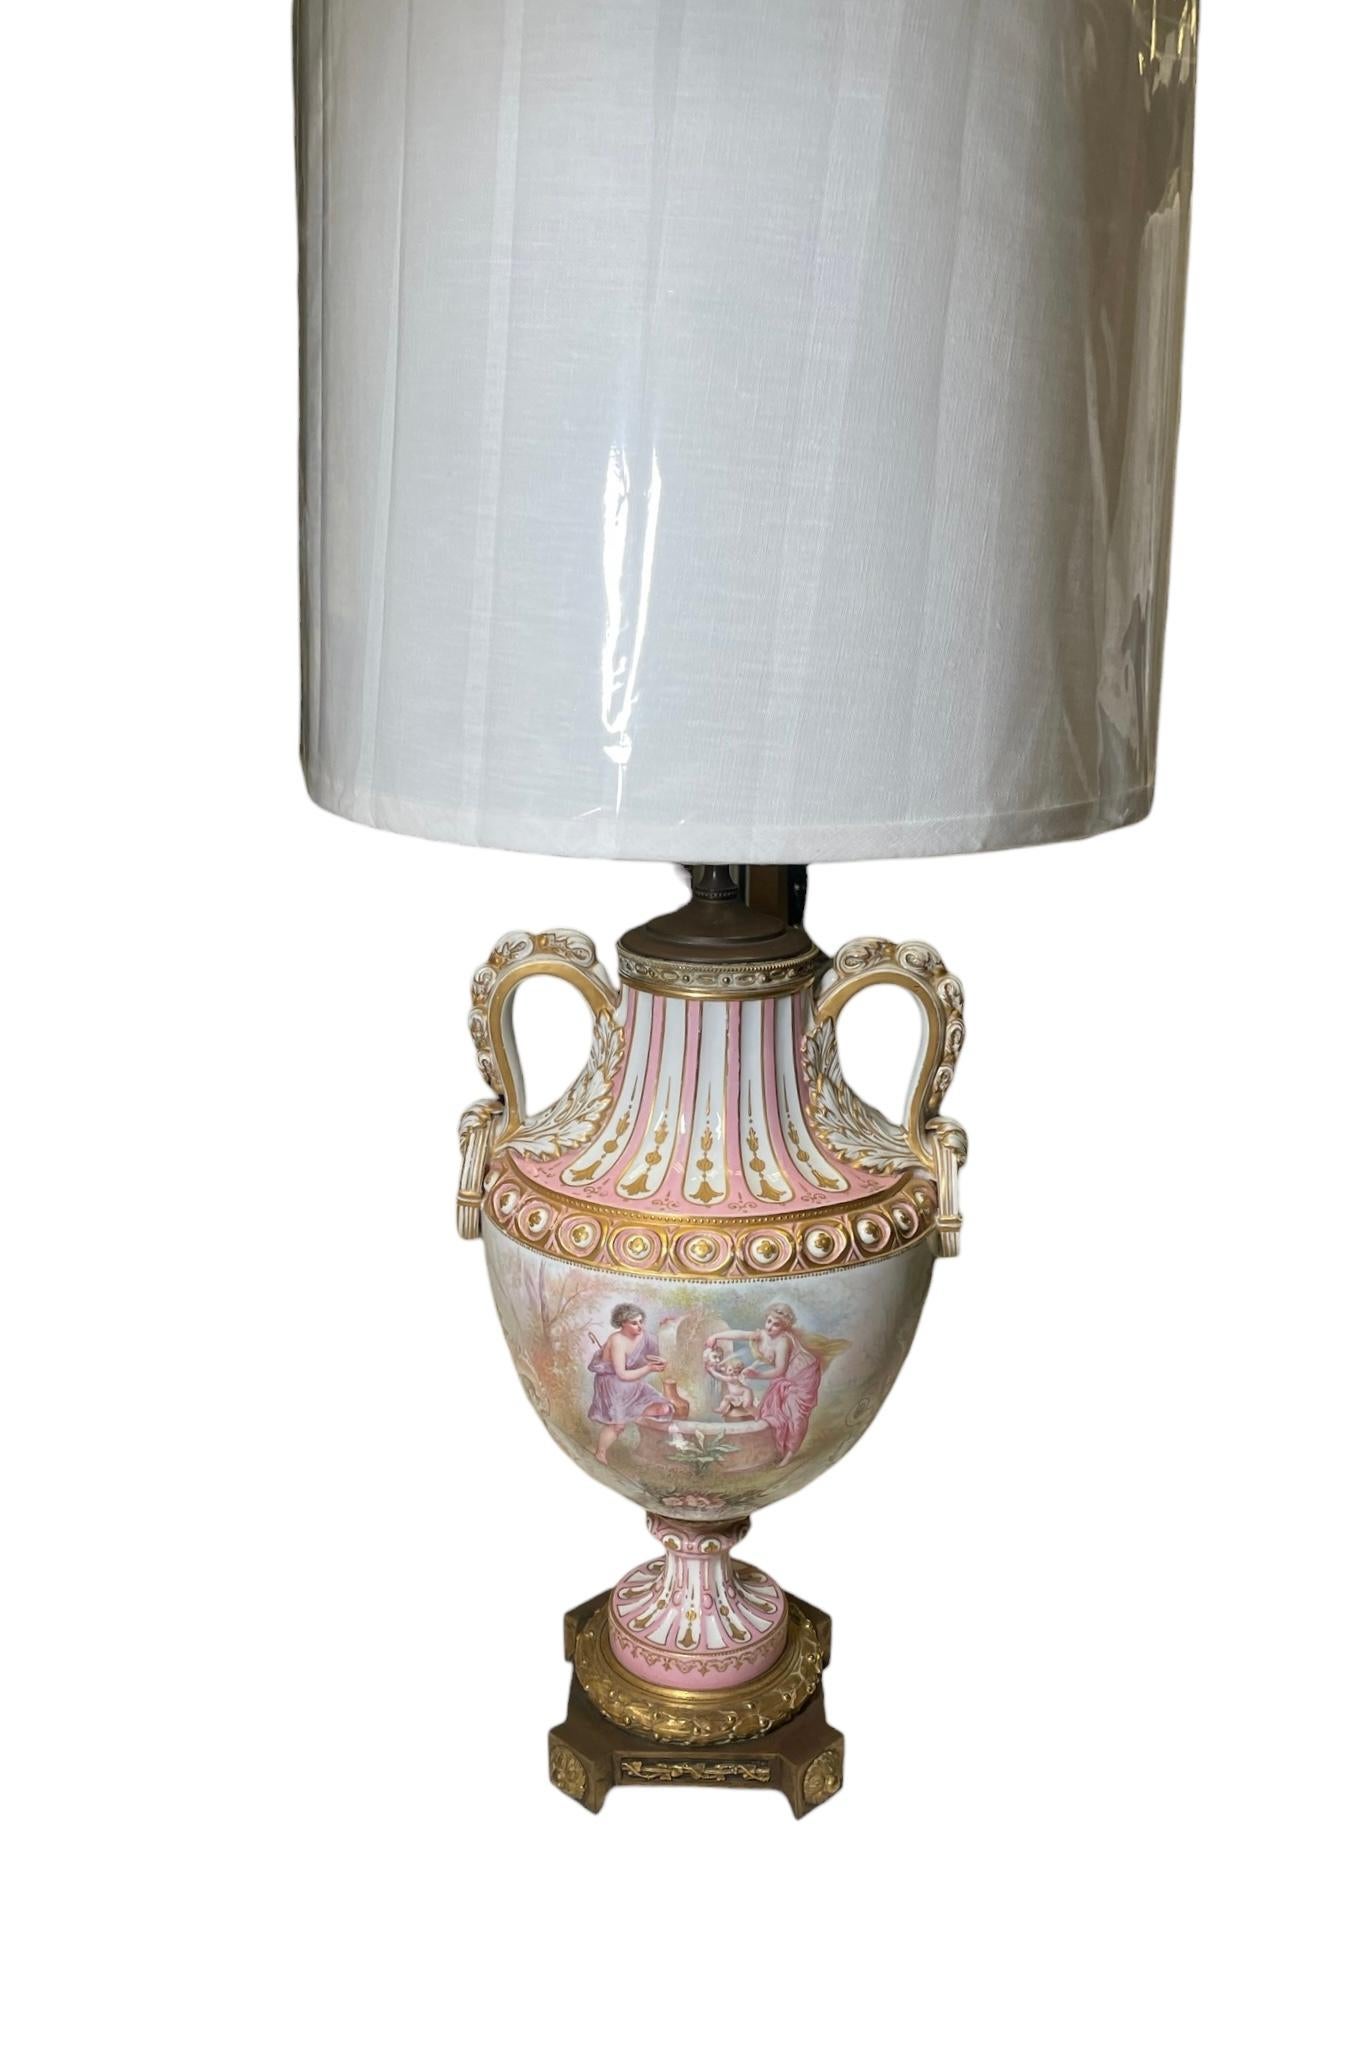 M. Demonceaux Sevres Style Porcelain Bronze Mounted Urn Table Lamp For Sale 7